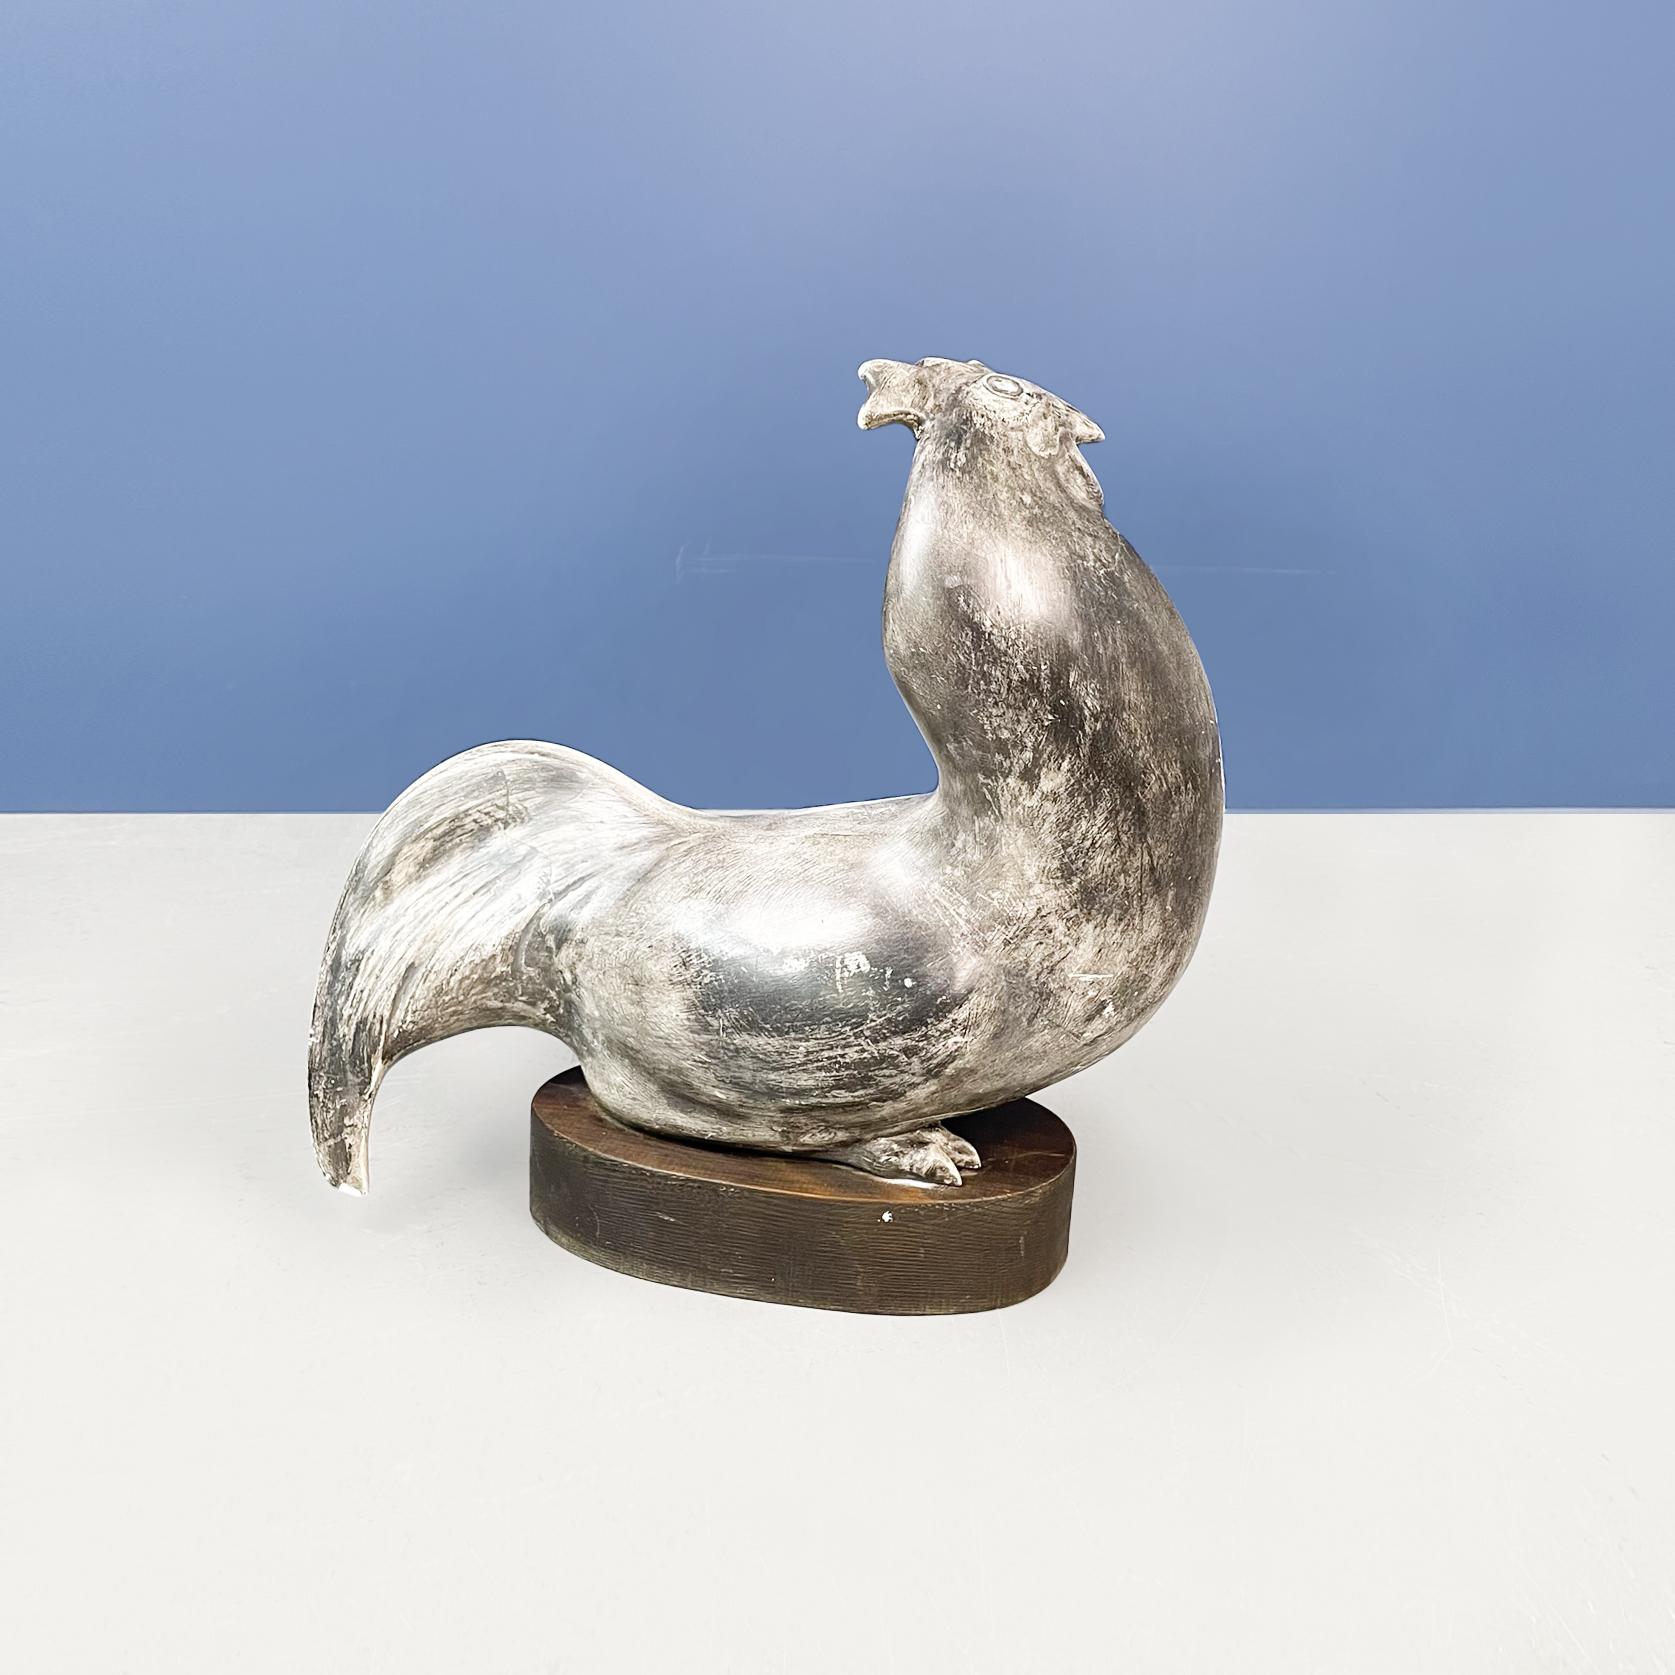 Italian modern Rooster statue in grey ceramic with base in wood, 1980s
Rooster statue with a sinuous shape, in gray painted ceramic. Finely worked. Oval wooden pedestal.
The Statue is perfect as decorator details for every appartment. The high